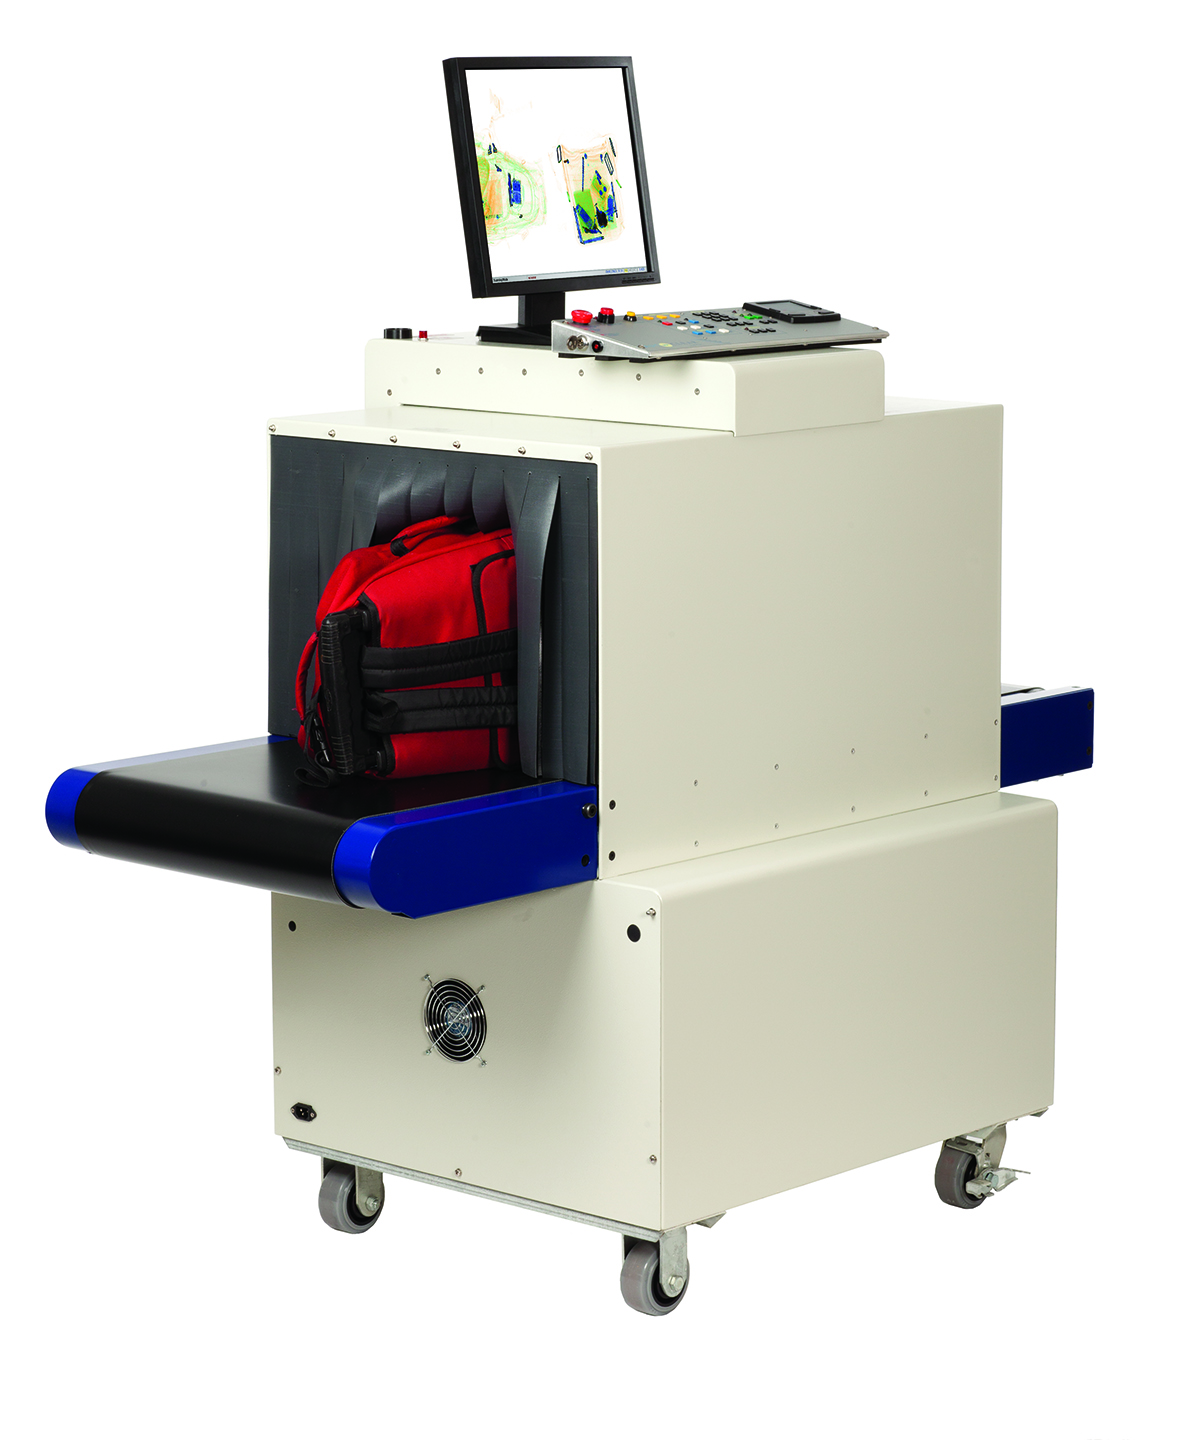 Autoclear 6040 X-ray inspection system